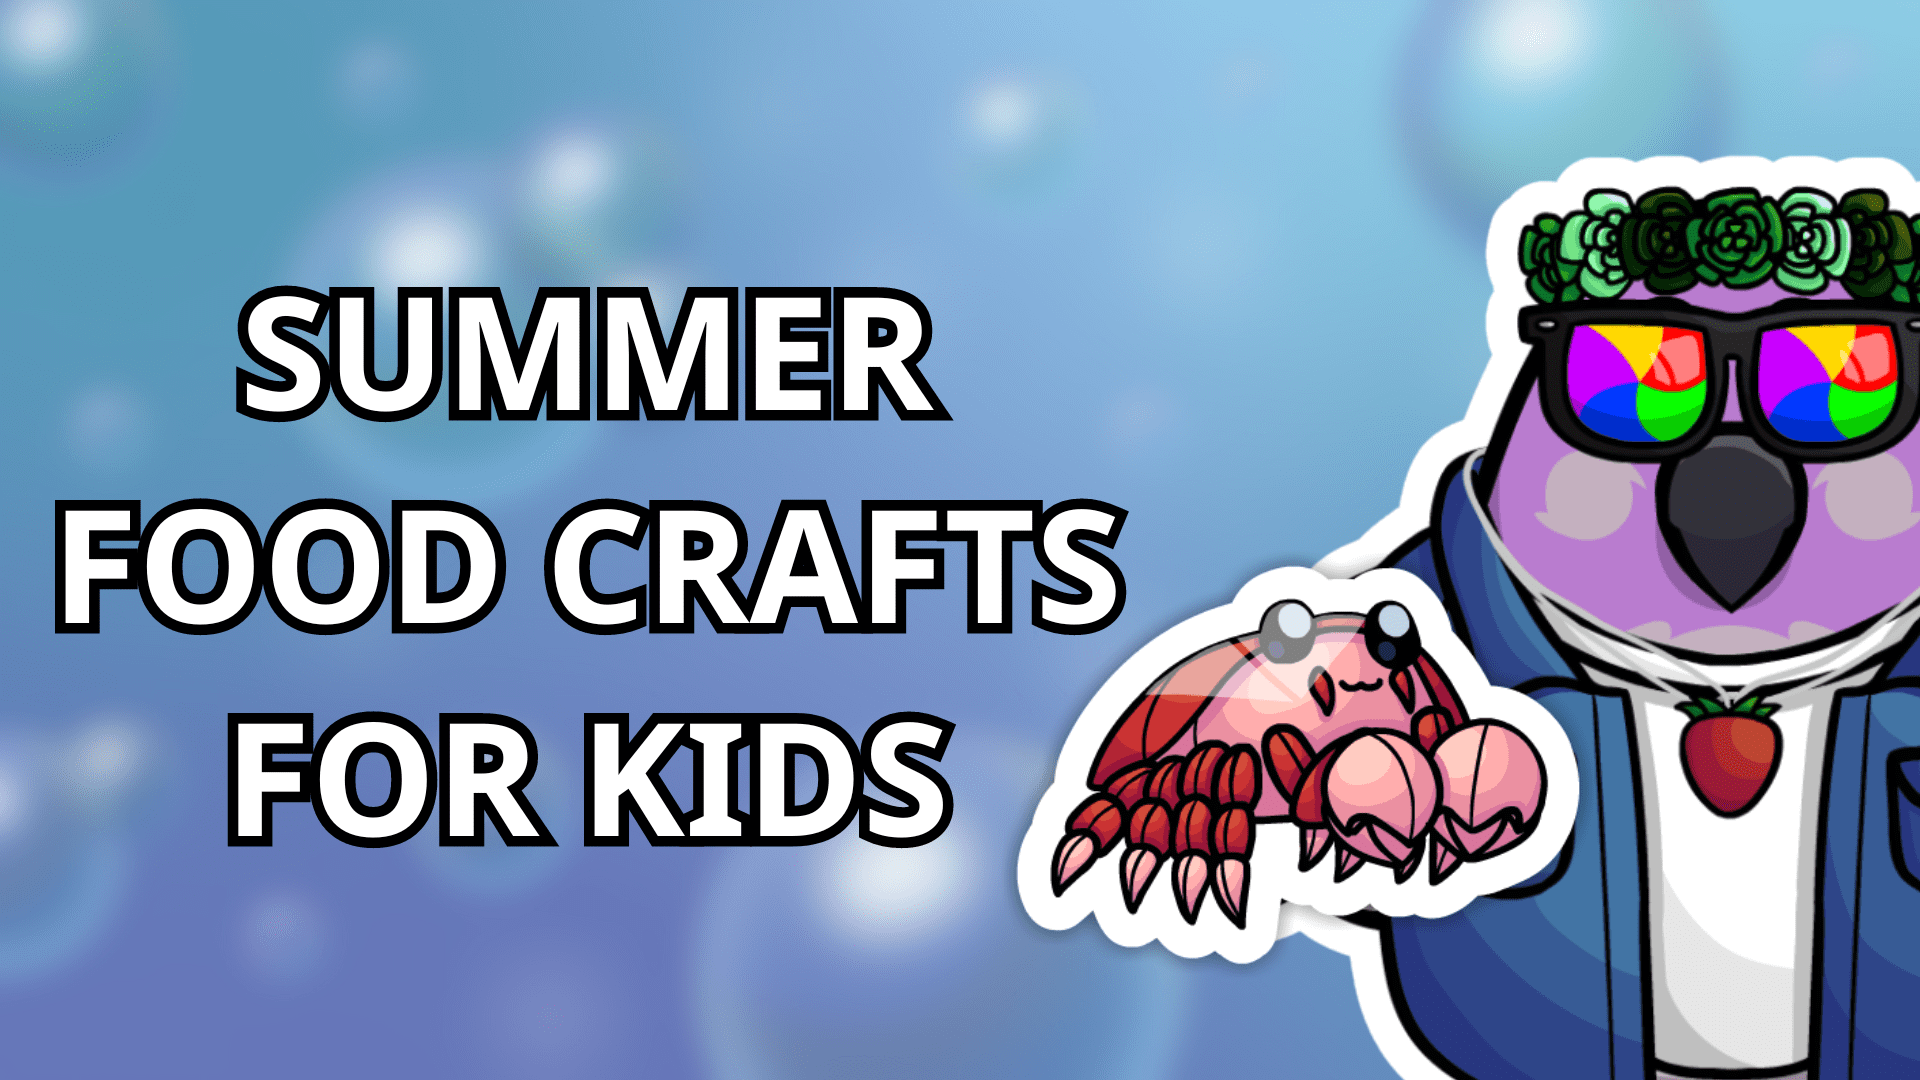 A parrot wearing a green flower crown and a strawberry necklace holding a crab. The text "Summer Food Crafts for Kids" against a blue bubble background.